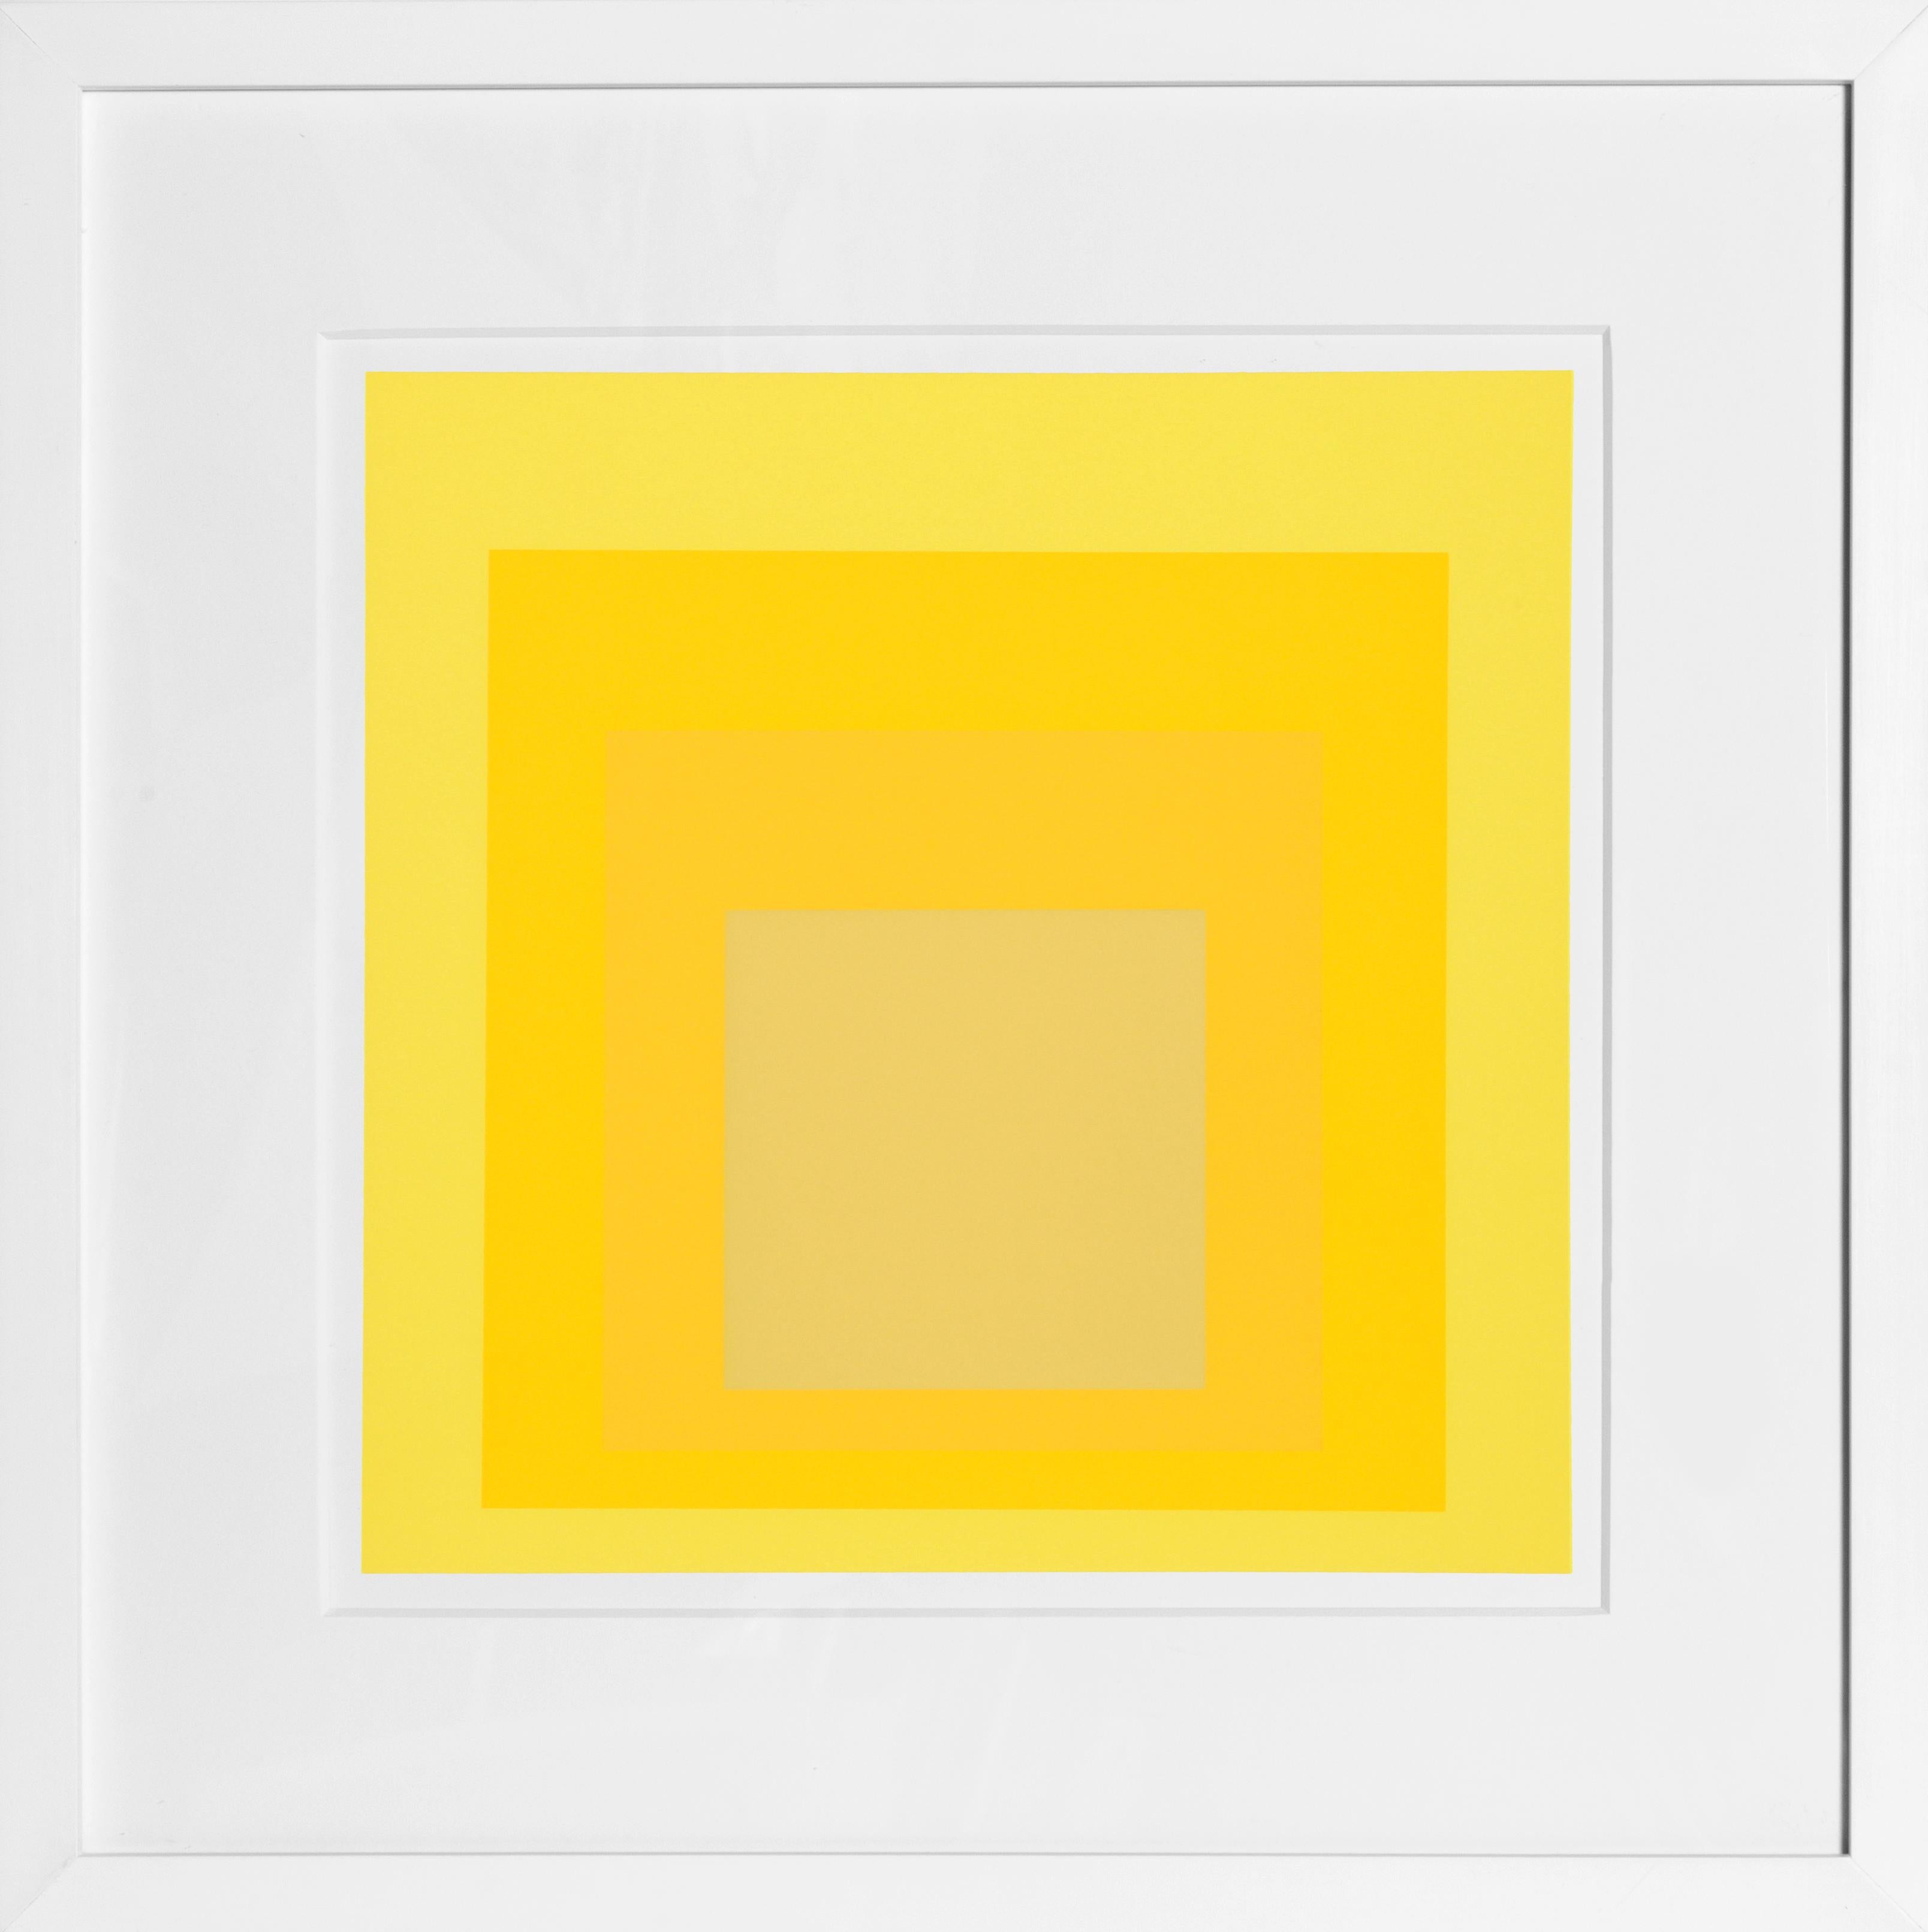 Abstract Print Josef Albers - Hommage au carré - P2, F14, I2